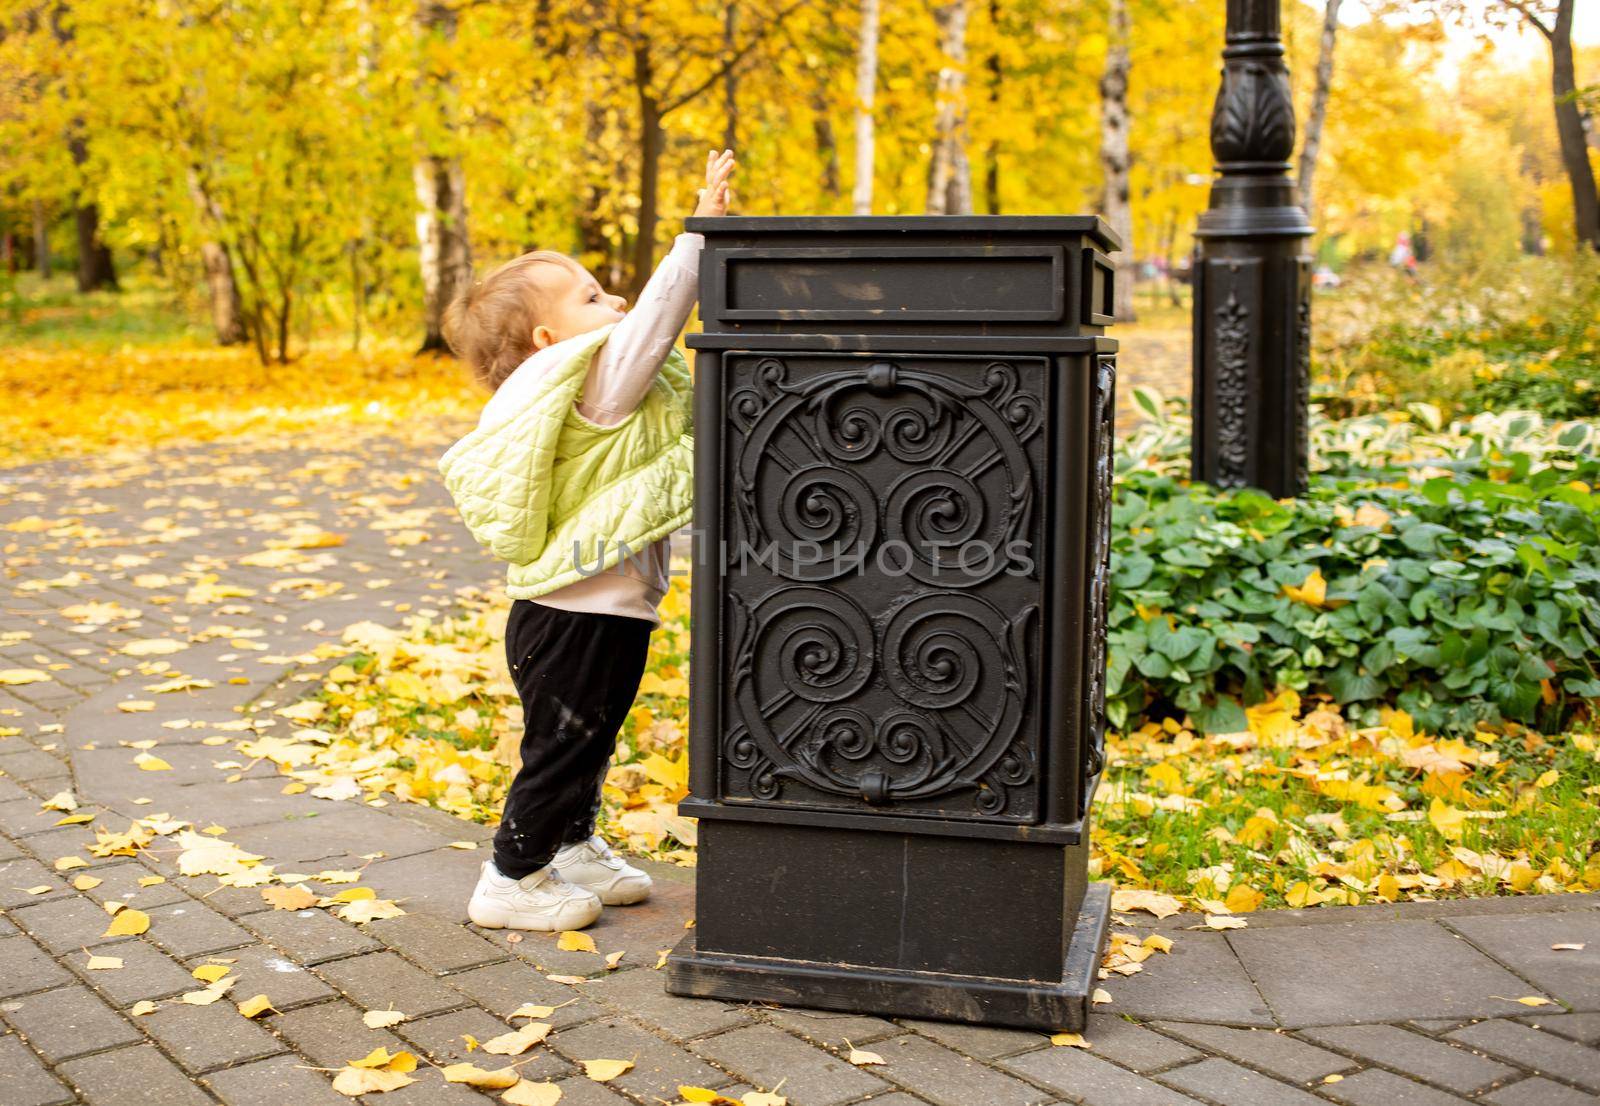 litte toddler throws trash into trash can in autumn park. instilling cultural norms from birth